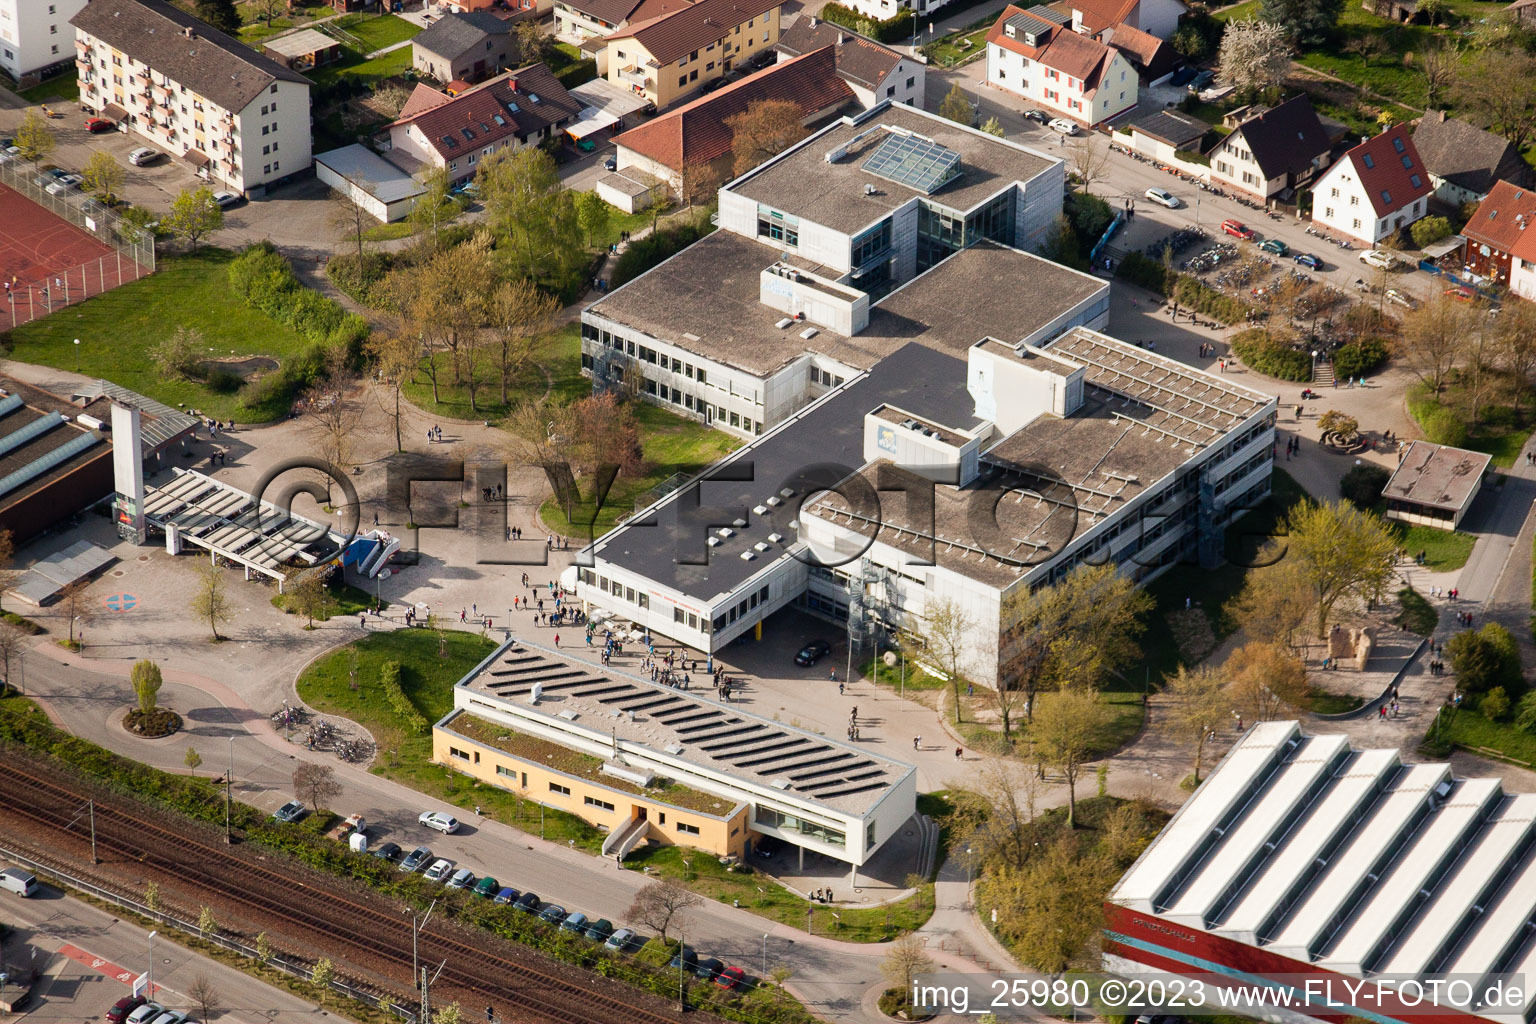 School building of the Ludwig-Marum-Gymnasium Pfinztal in the district Berghausen in Pfinztal in the state Baden-Wurttemberg from the plane